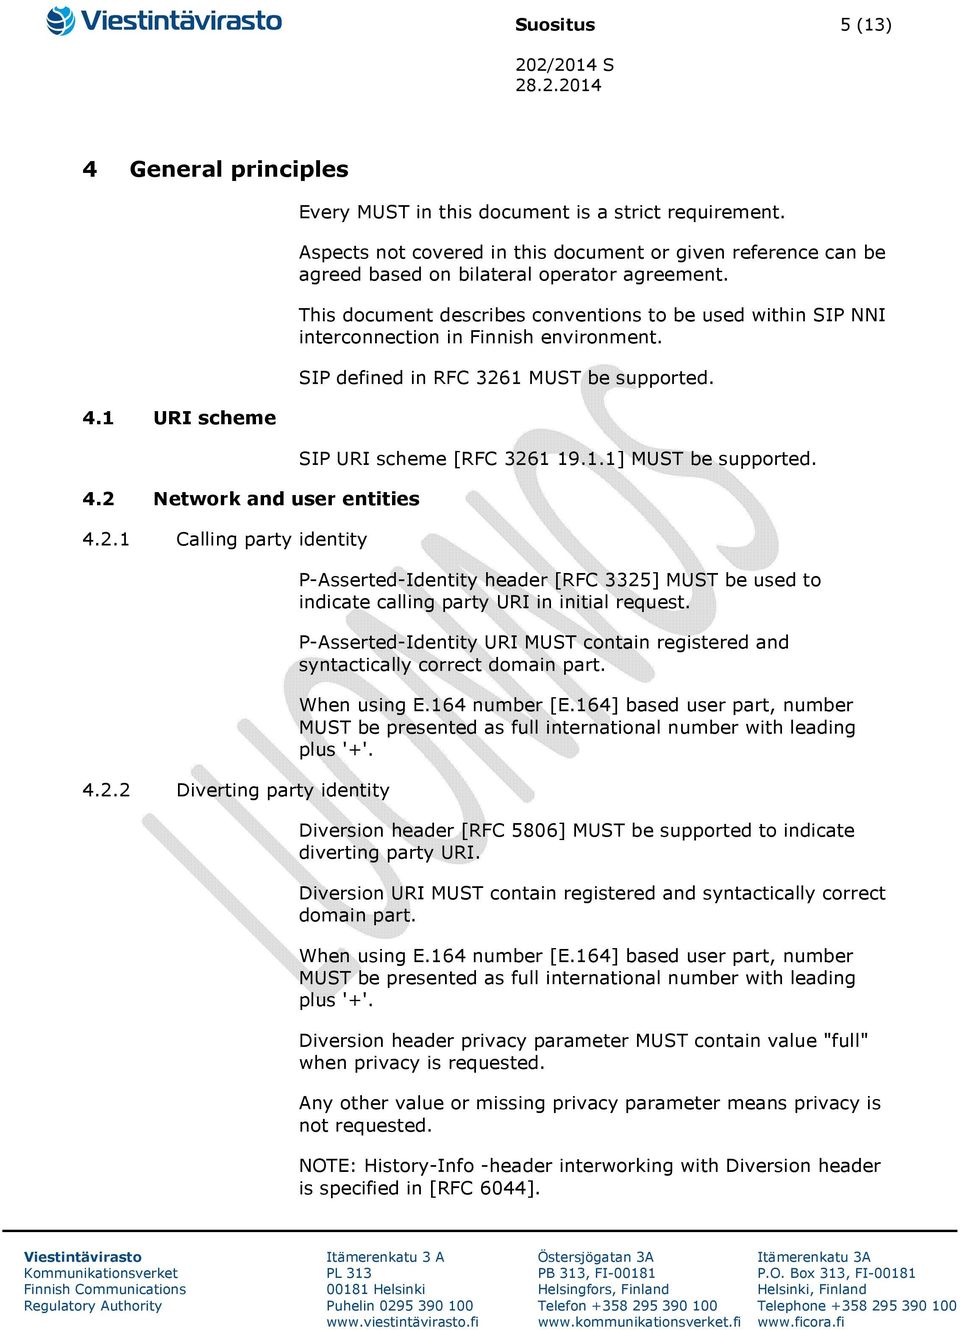 This document describes conventions to be used within SIP NNI interconnection in Finnish environment. SIP defined in RFC 3261 MUST be supported. SIP URI scheme [RFC 3261 19.1.1] MUST be supported.